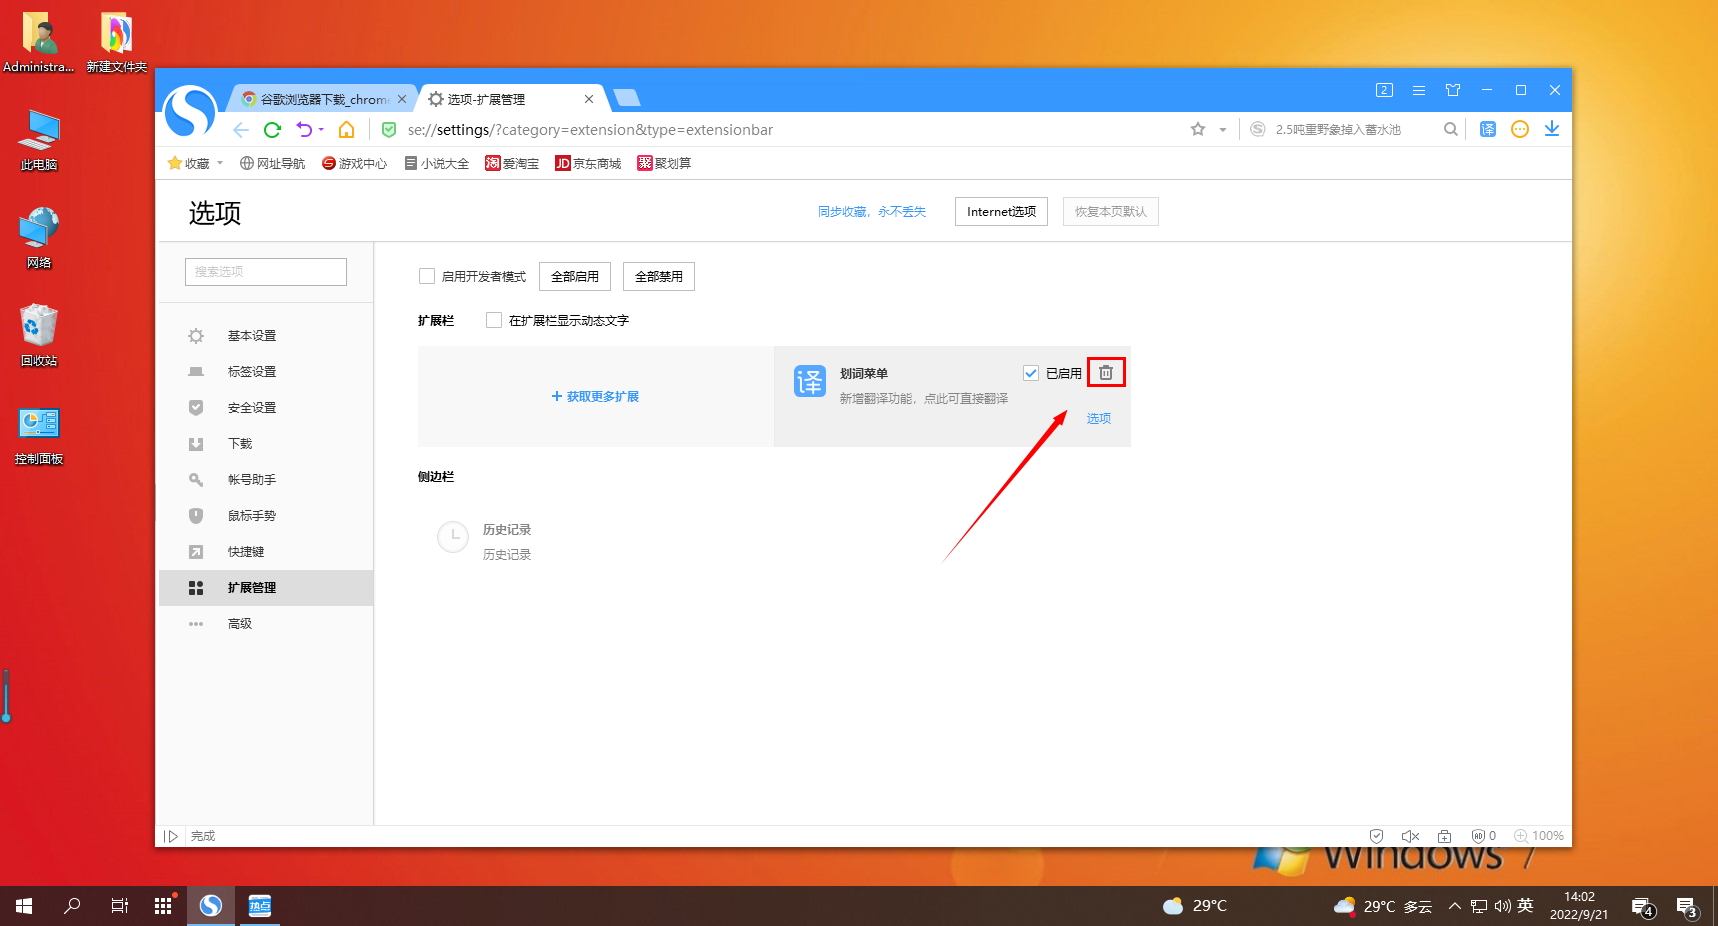 How to uninstall extensions in Sogou Browser